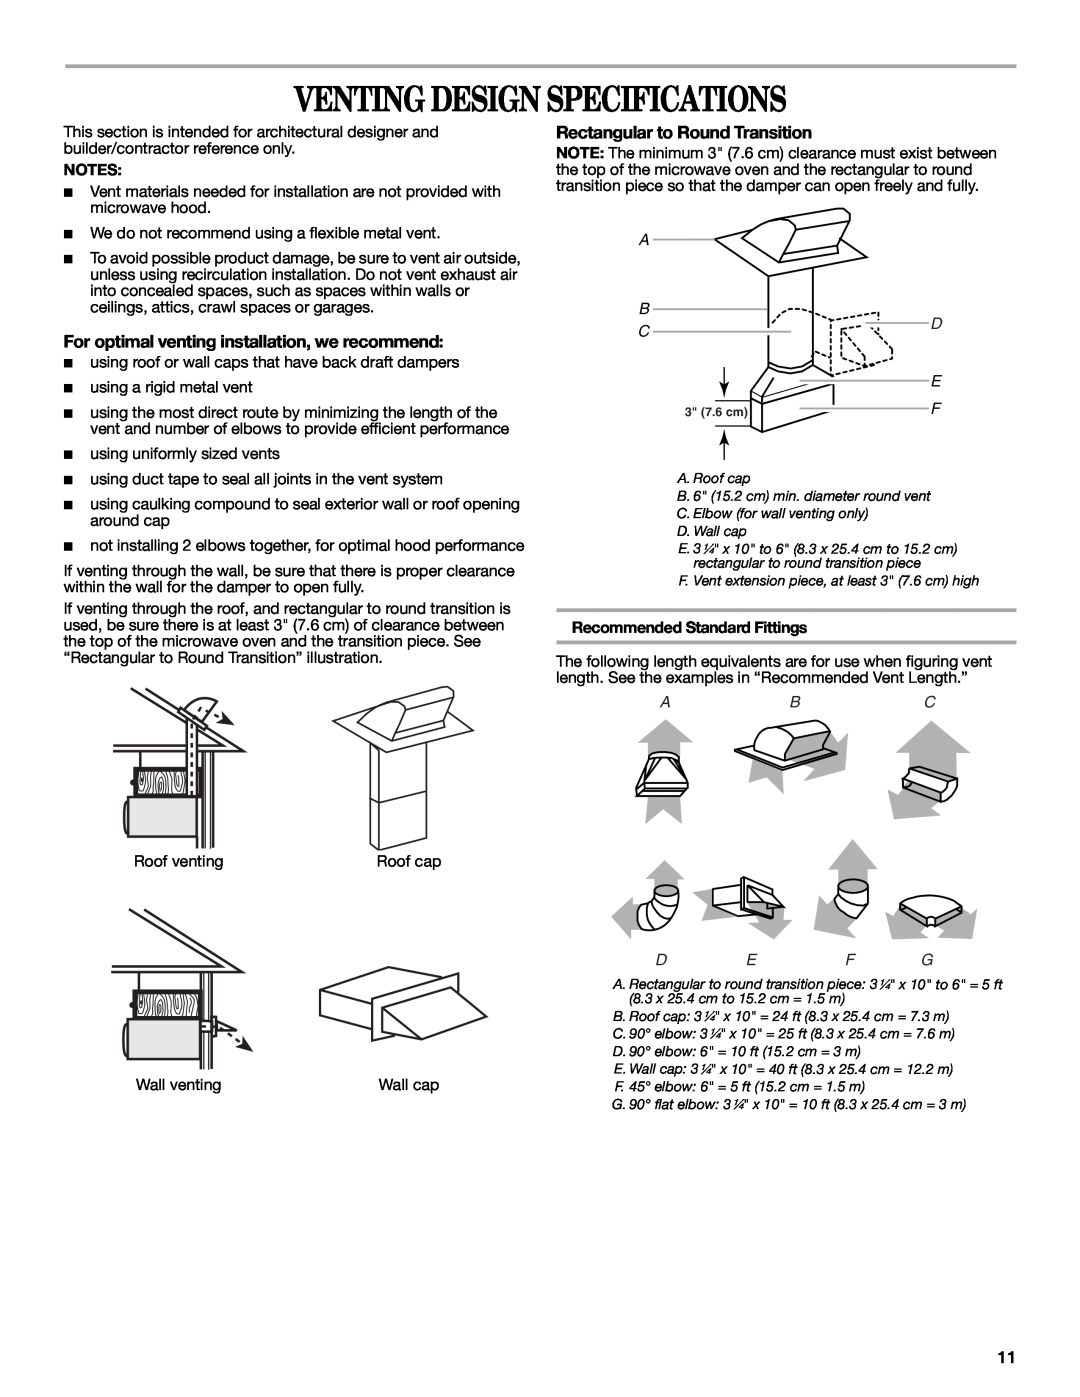 Whirlpool MH3184XPS5 Venting Design Specifications, For optimal venting installation, we recommend, Defg 